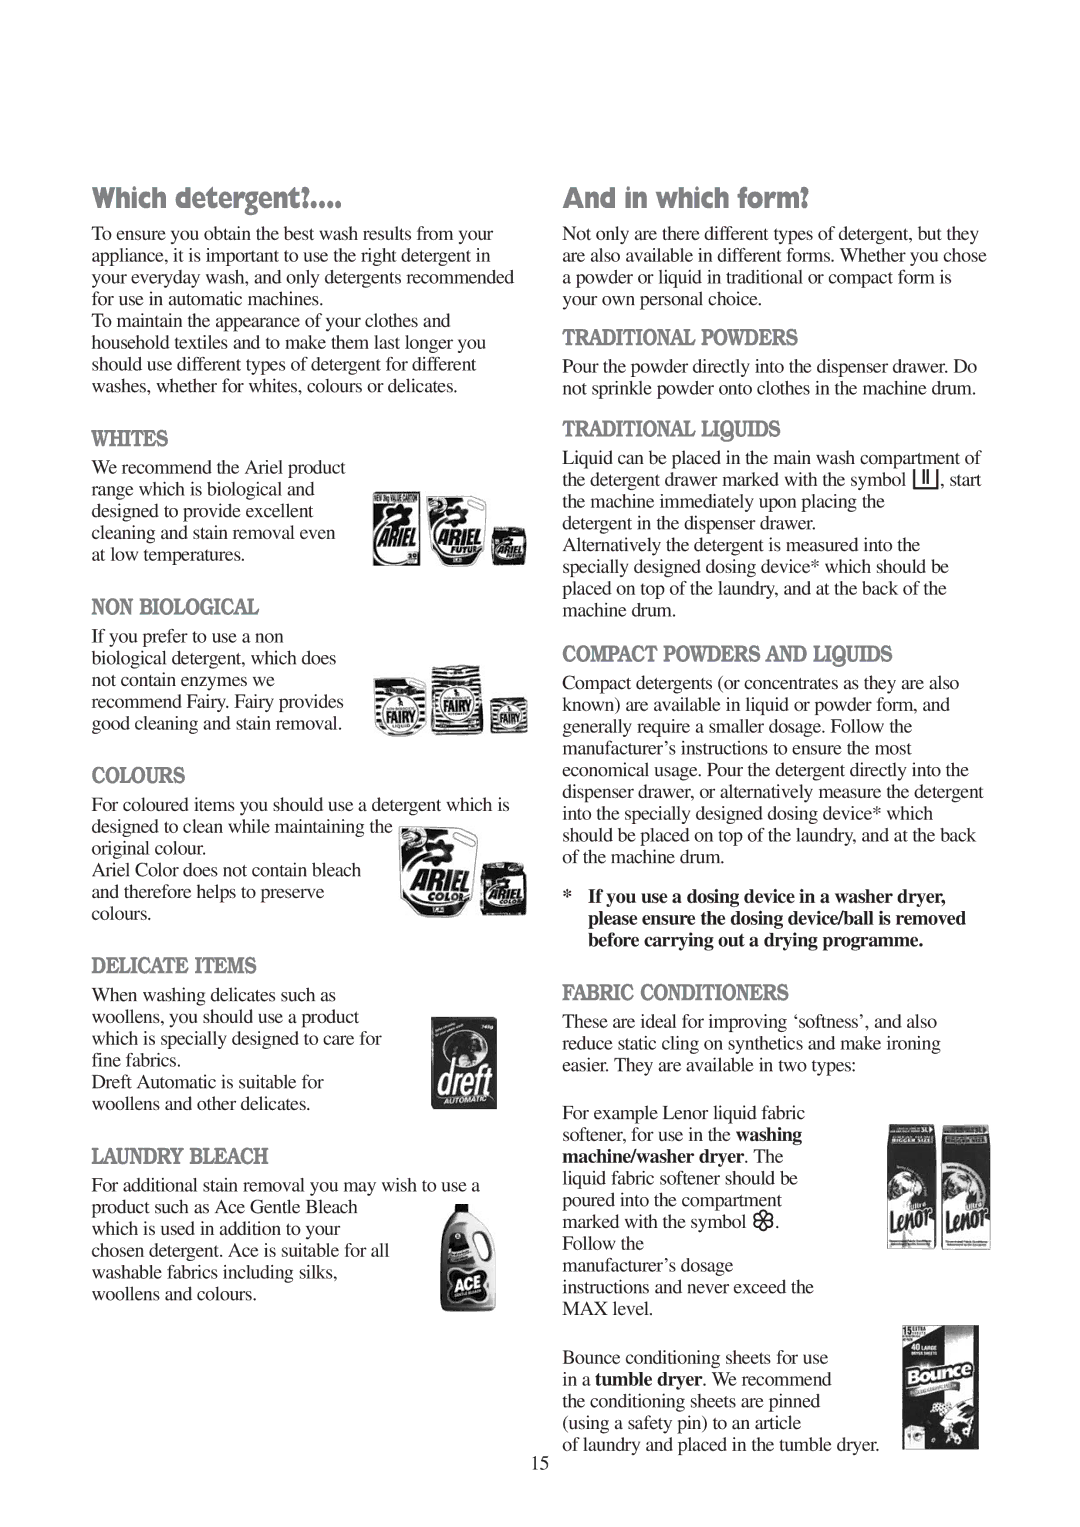 Electrolux EWD 1409 I manual Which detergent?, Which form?, Laundry and placed in the tumble dryer 